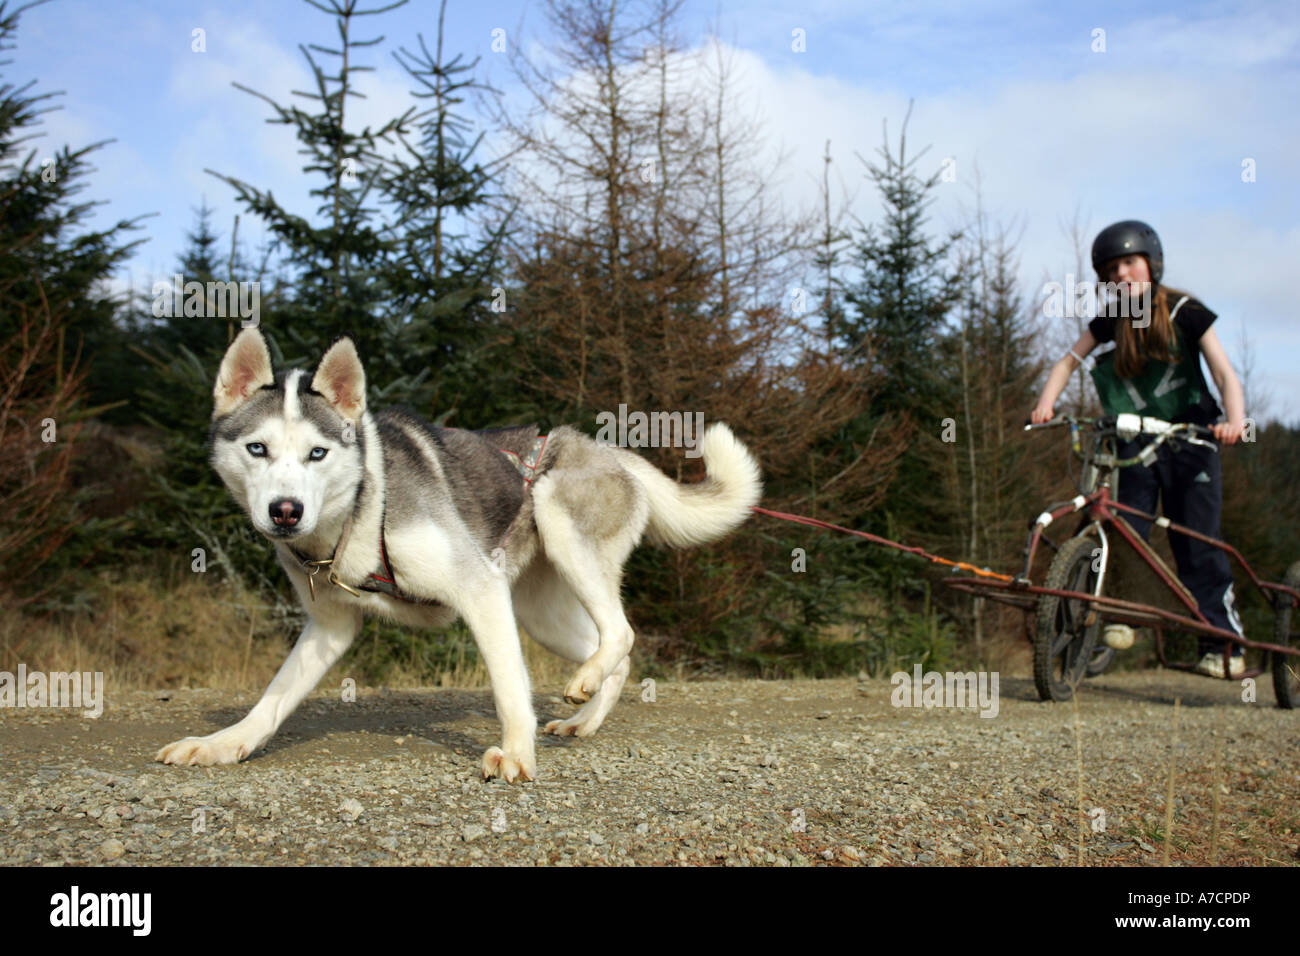 Boy competes in Husky racing at Fetteresso Forest near Stonehaven, Aberdeenshire, Scotland UK Stock Photo